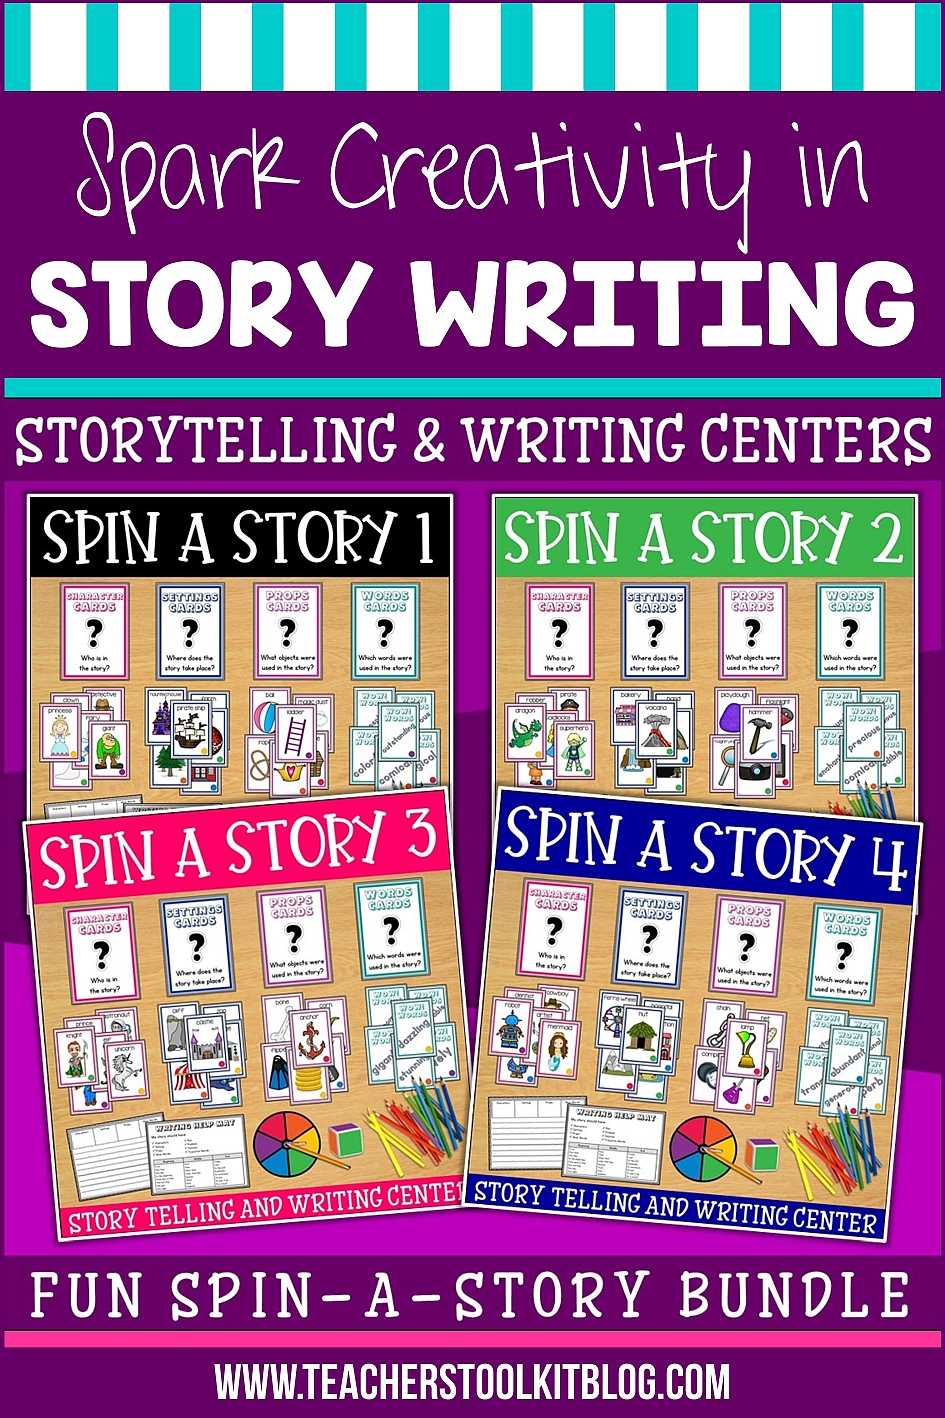 Fun Story Starters for Writing Centers - Teacher's Toolkit Blog